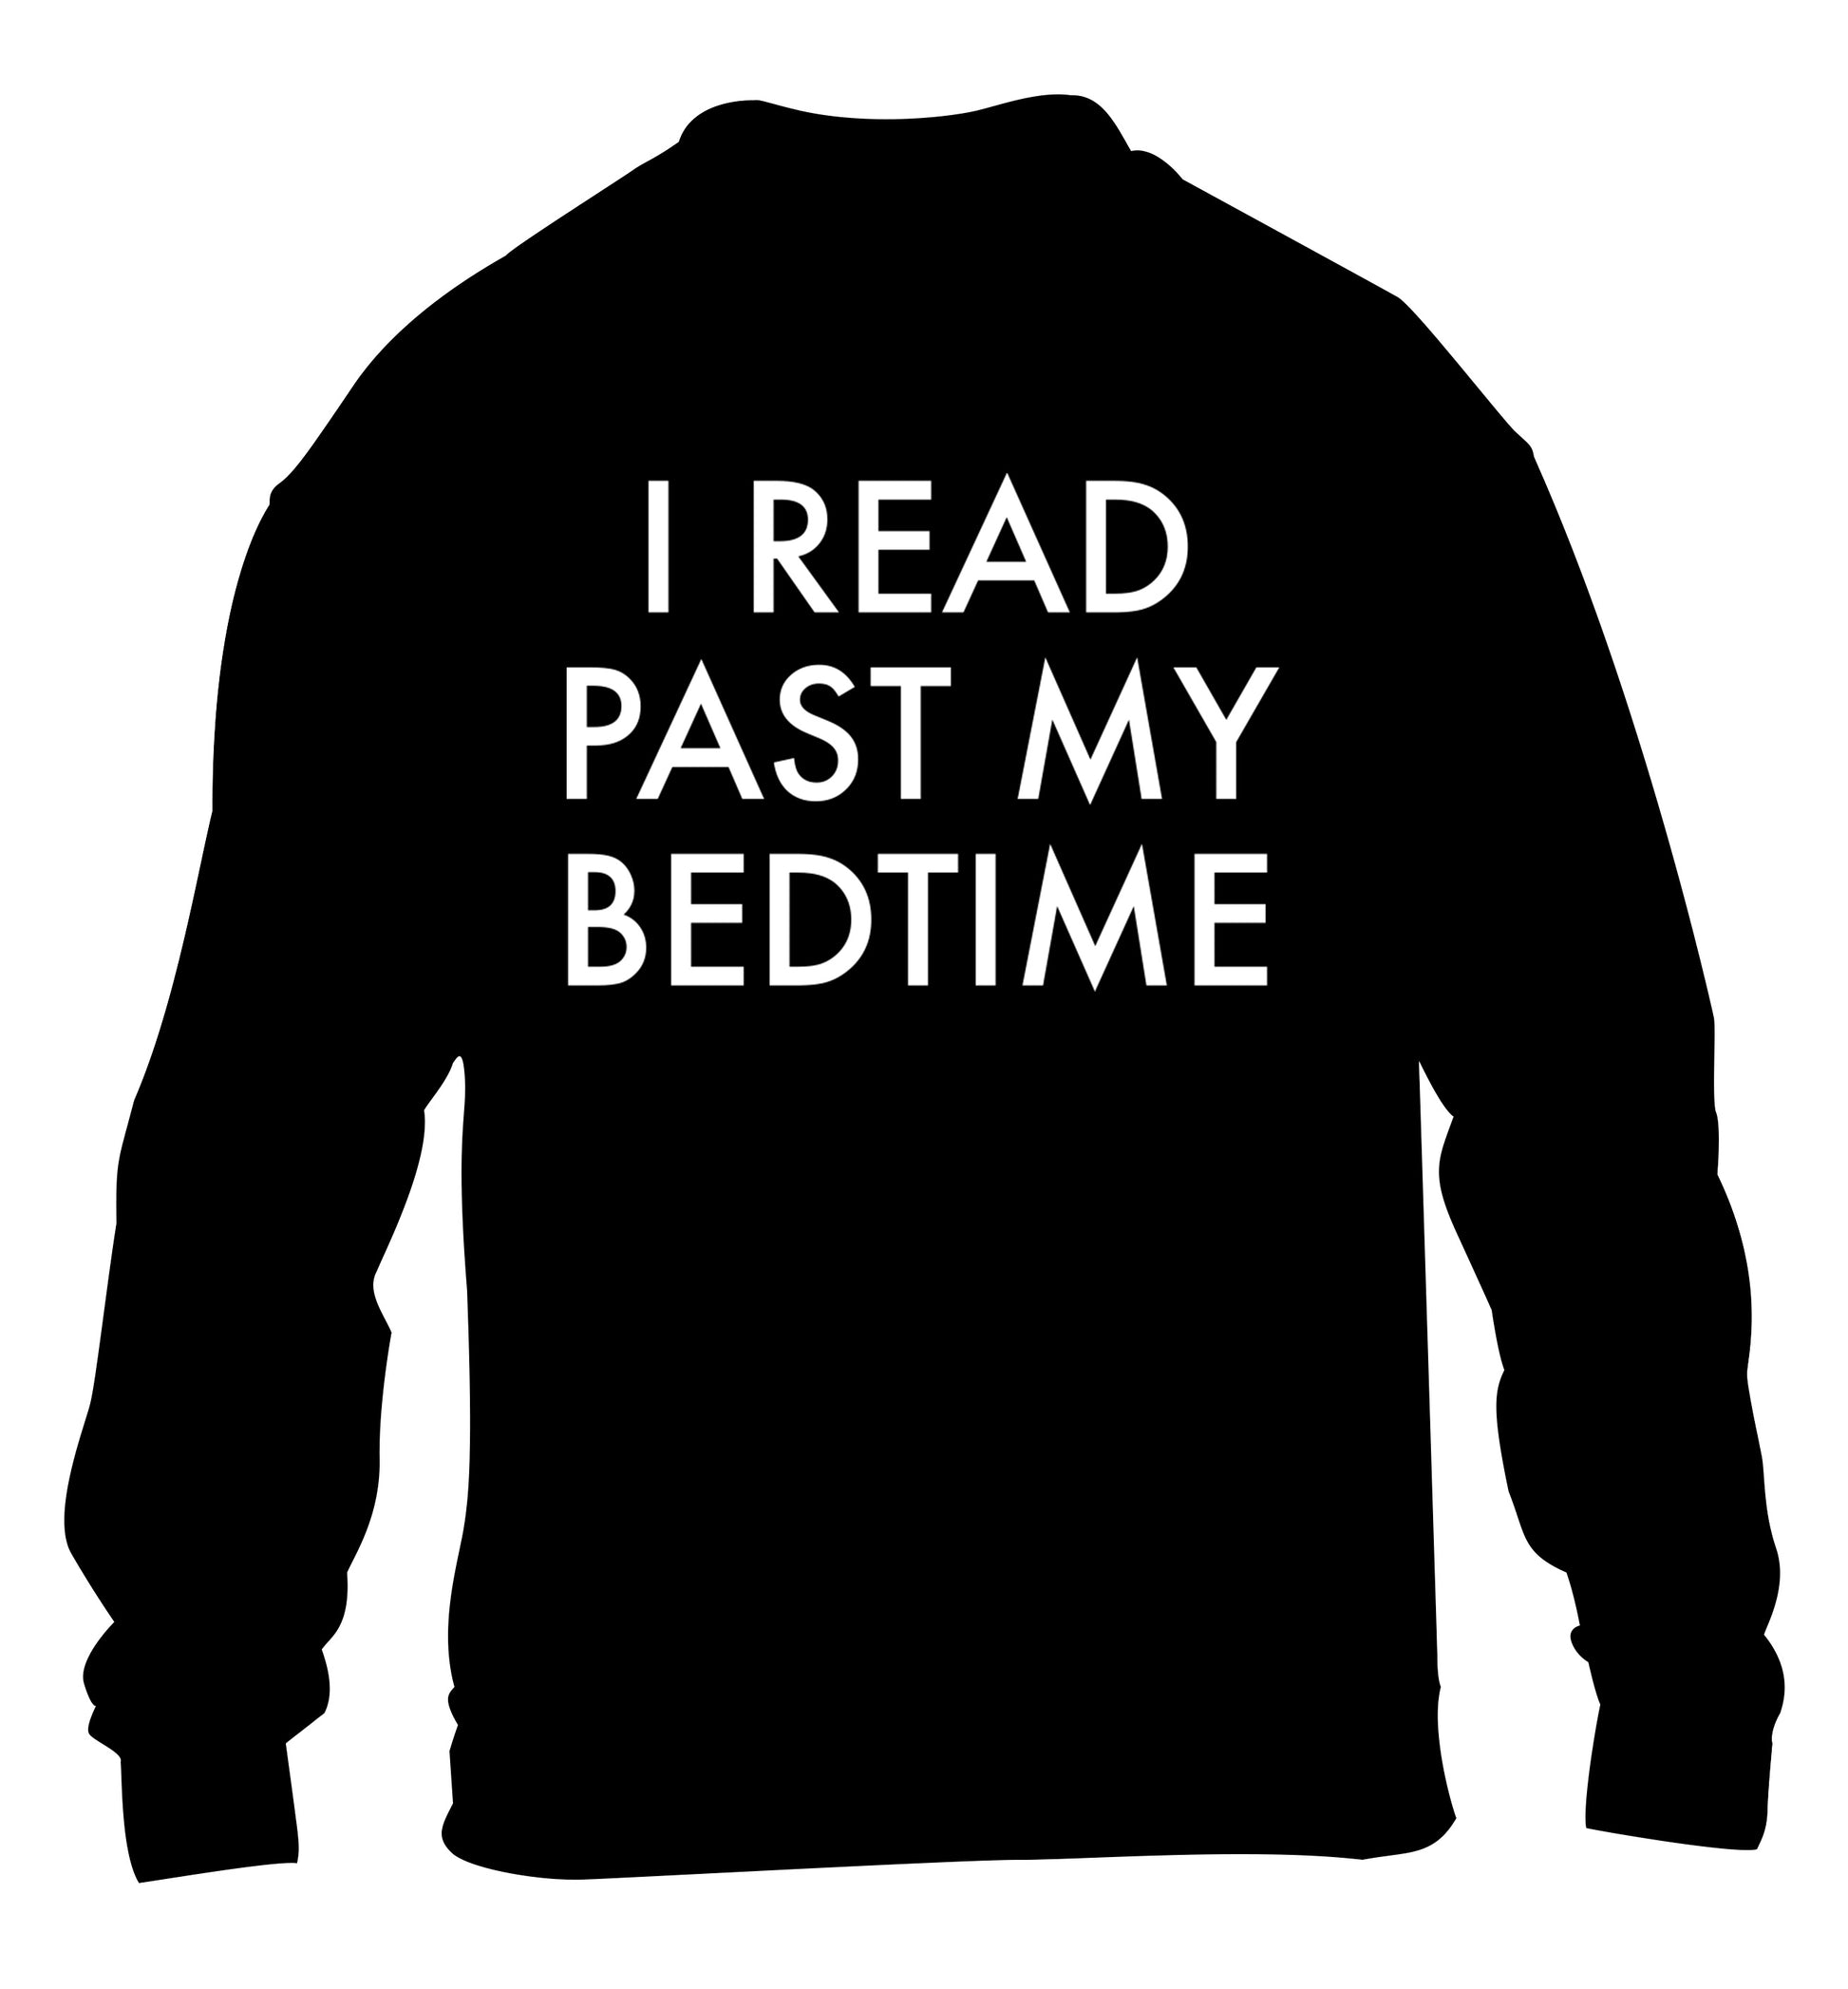 I read past my bedtime children's black sweater 12-14 Years